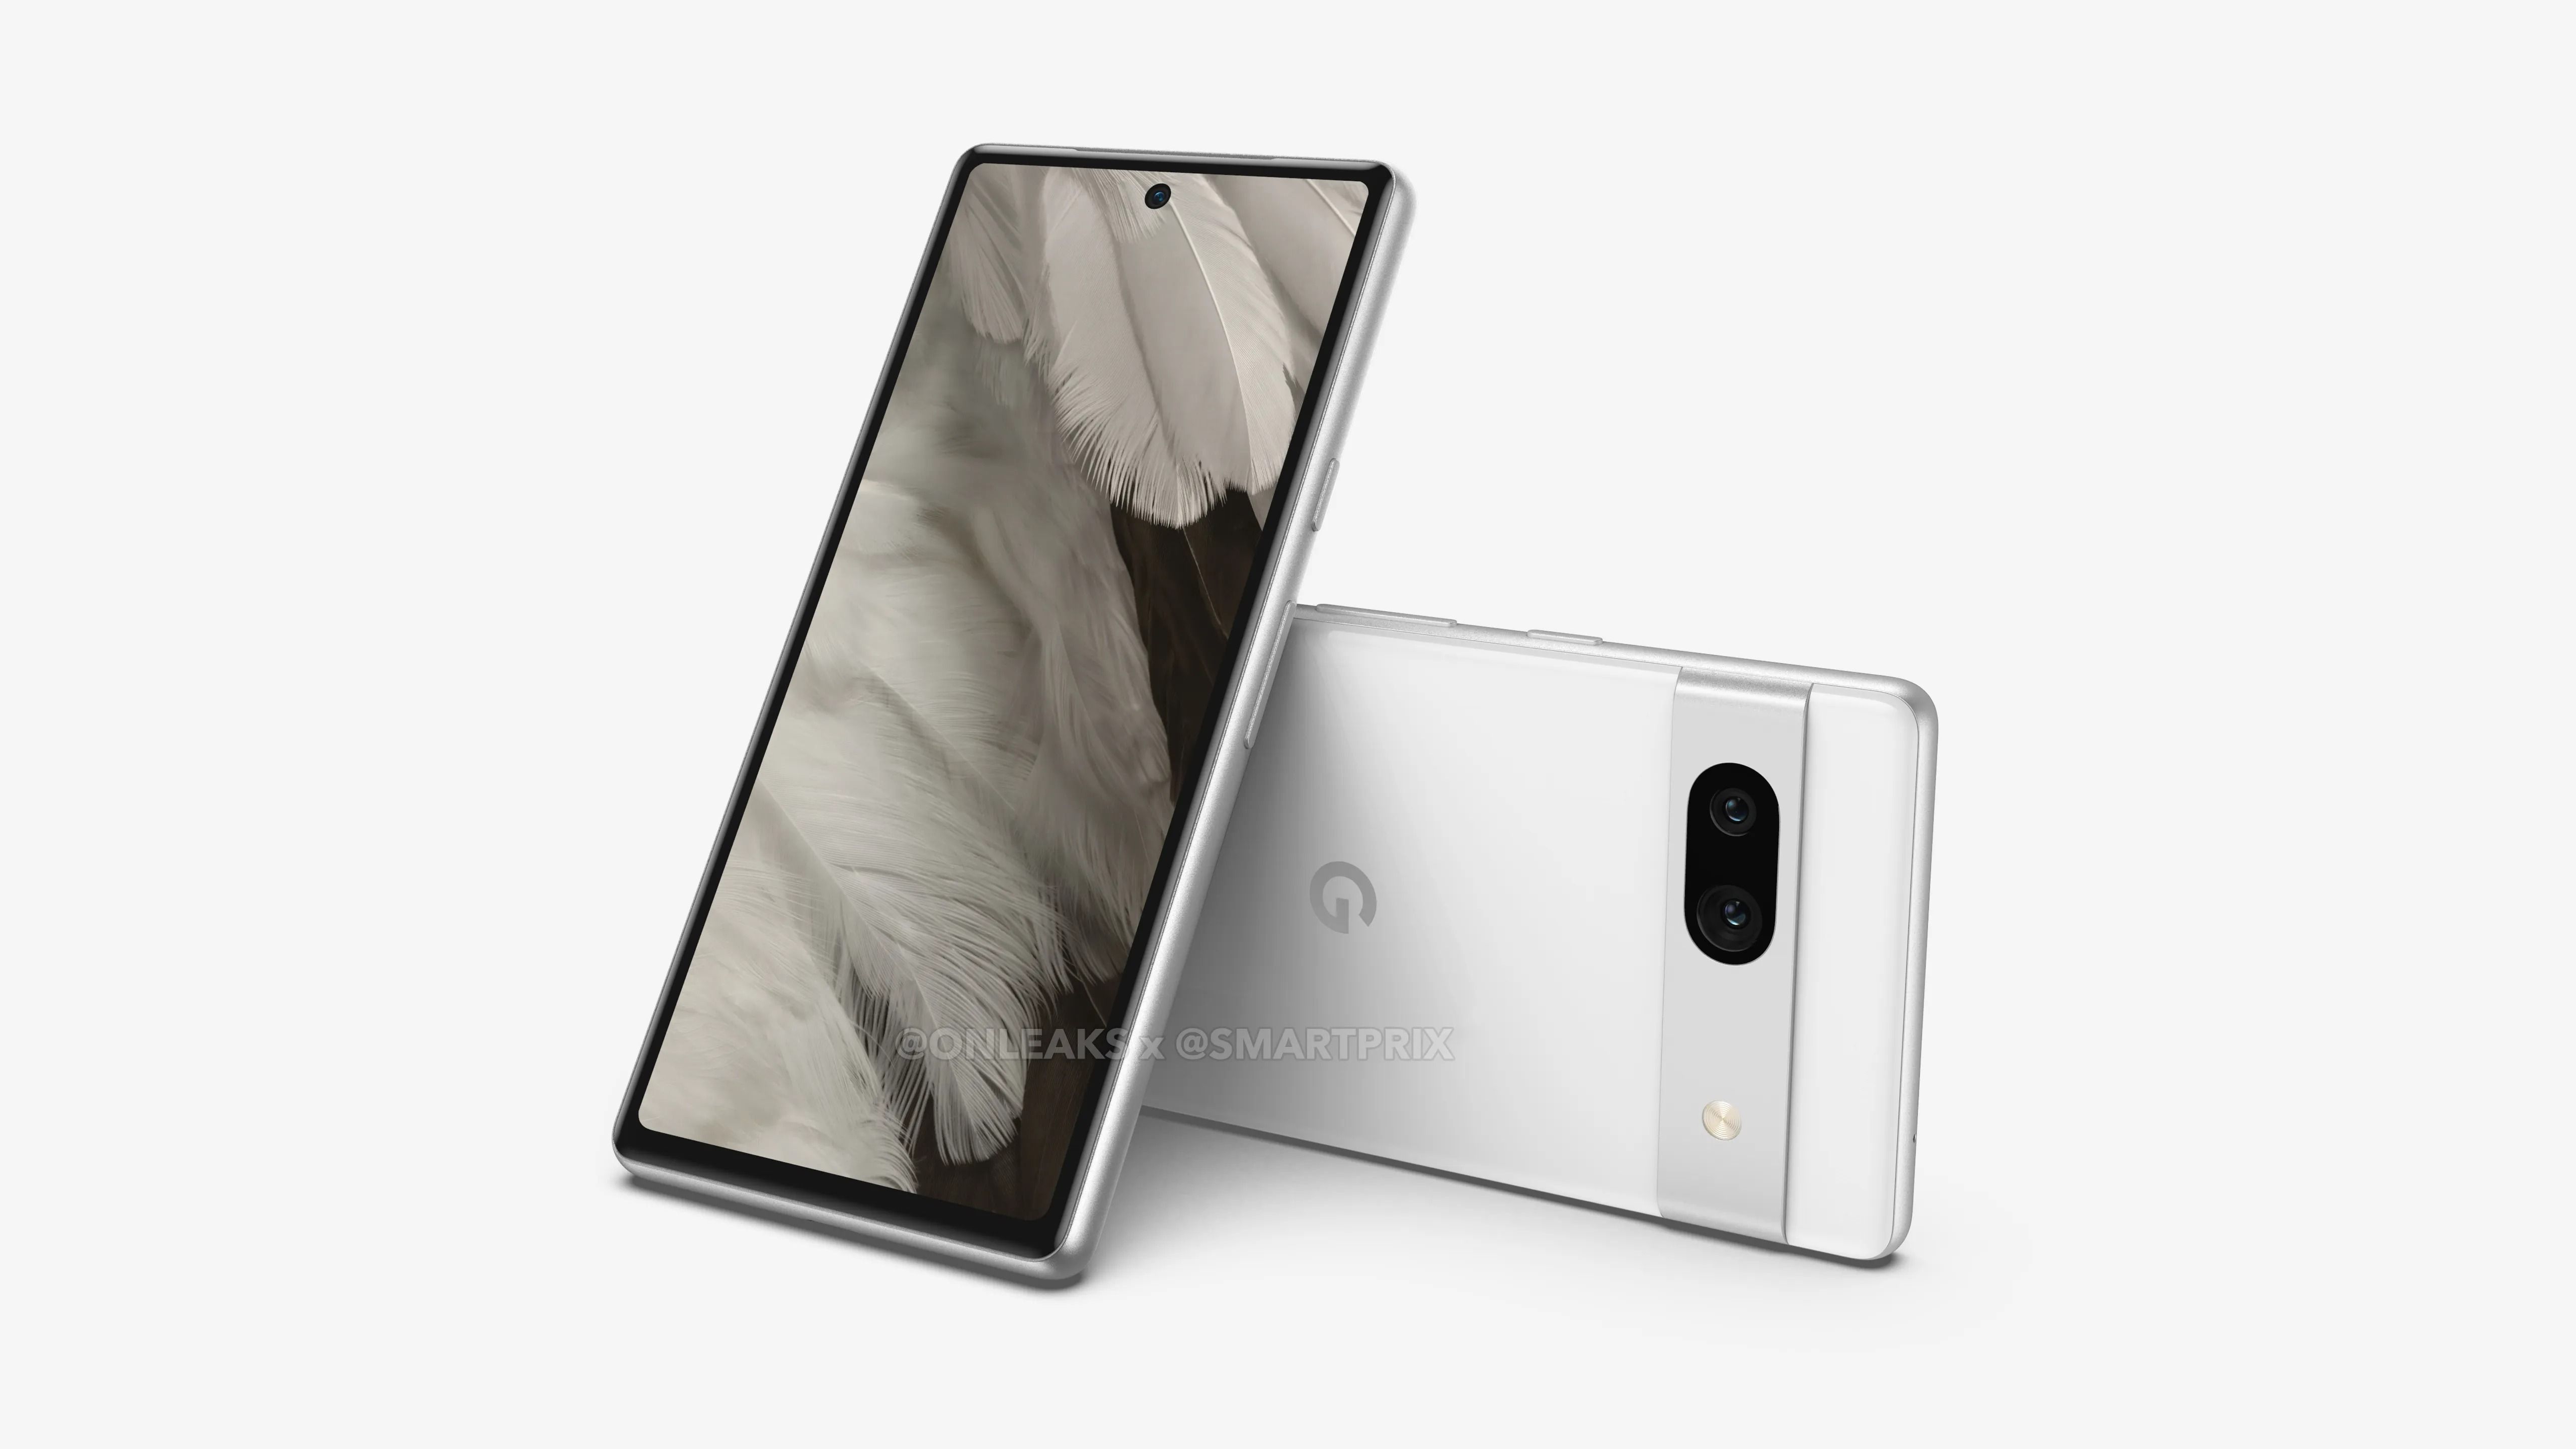 Render of the front and back of the Pixel 7a in white. The back of the phone is shown horizontally while the front is vertical.